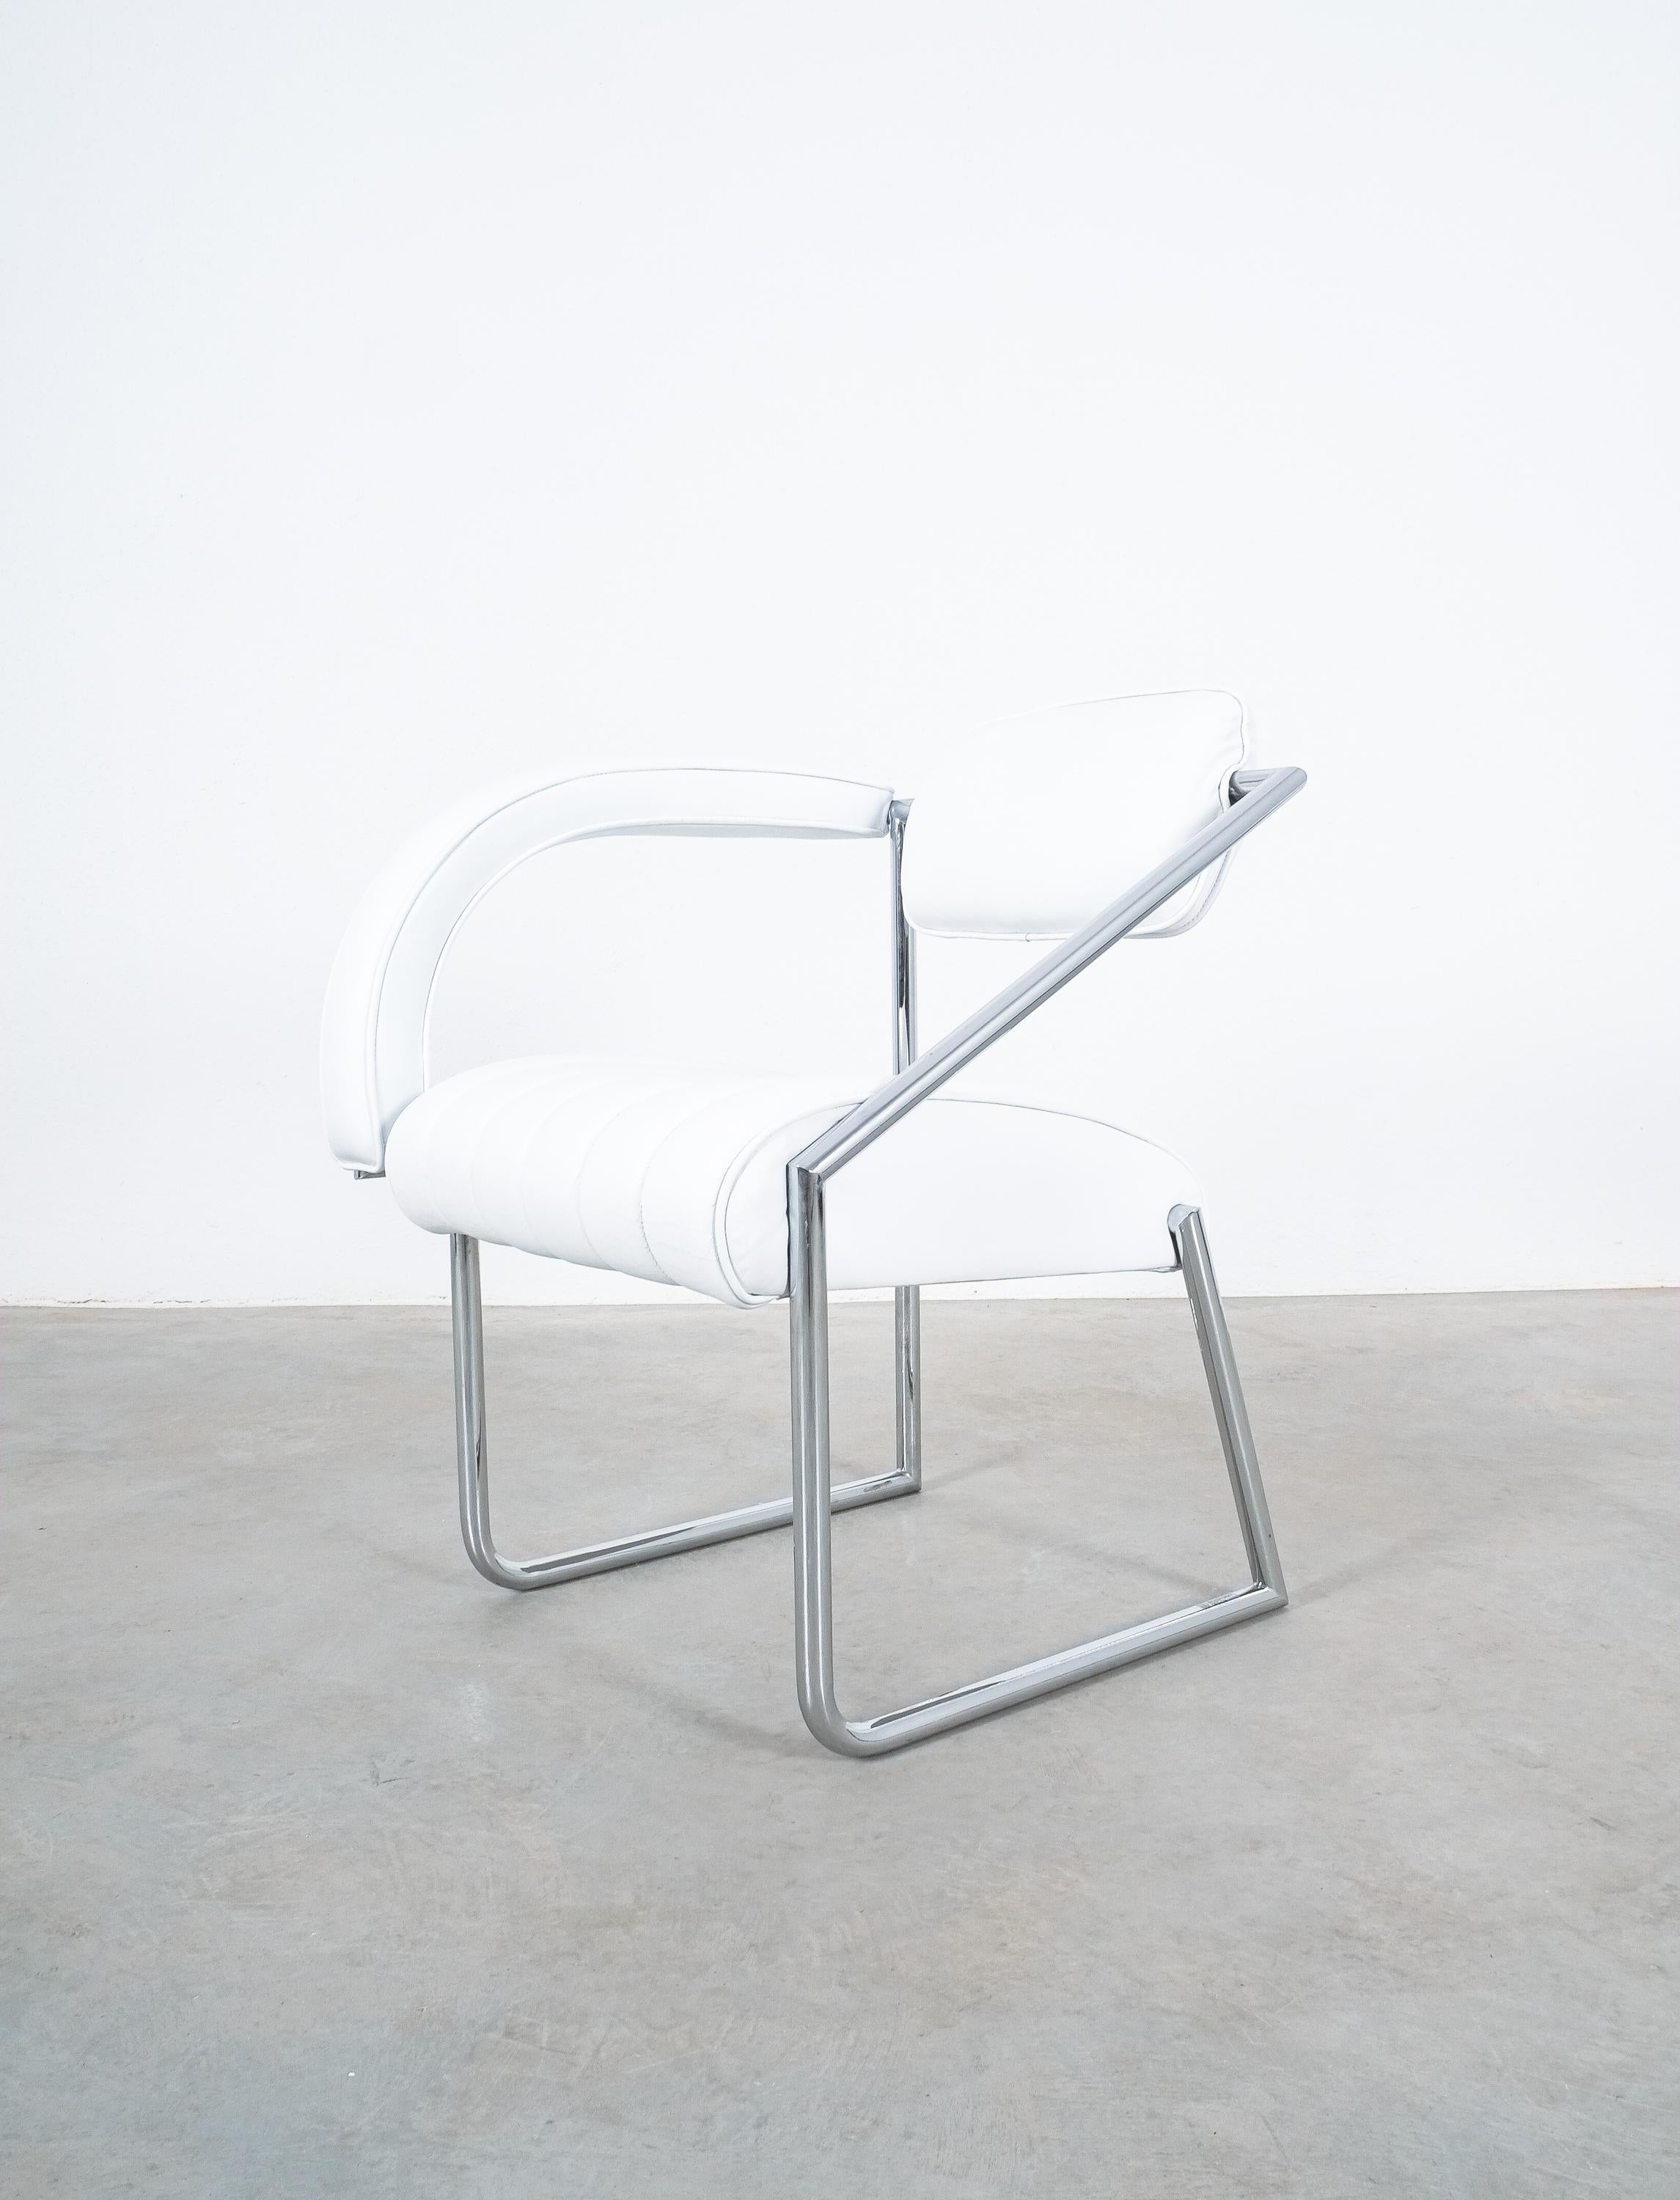 Non conformist chair by Eileen Gray, designed 1926, production by Vereinige Werkstaetten, Werkstätten, Germany circa 1985- labelled

Unusual design icon by Eileen Gray with the missing armrest that allowed more freedom of movement and one of the key